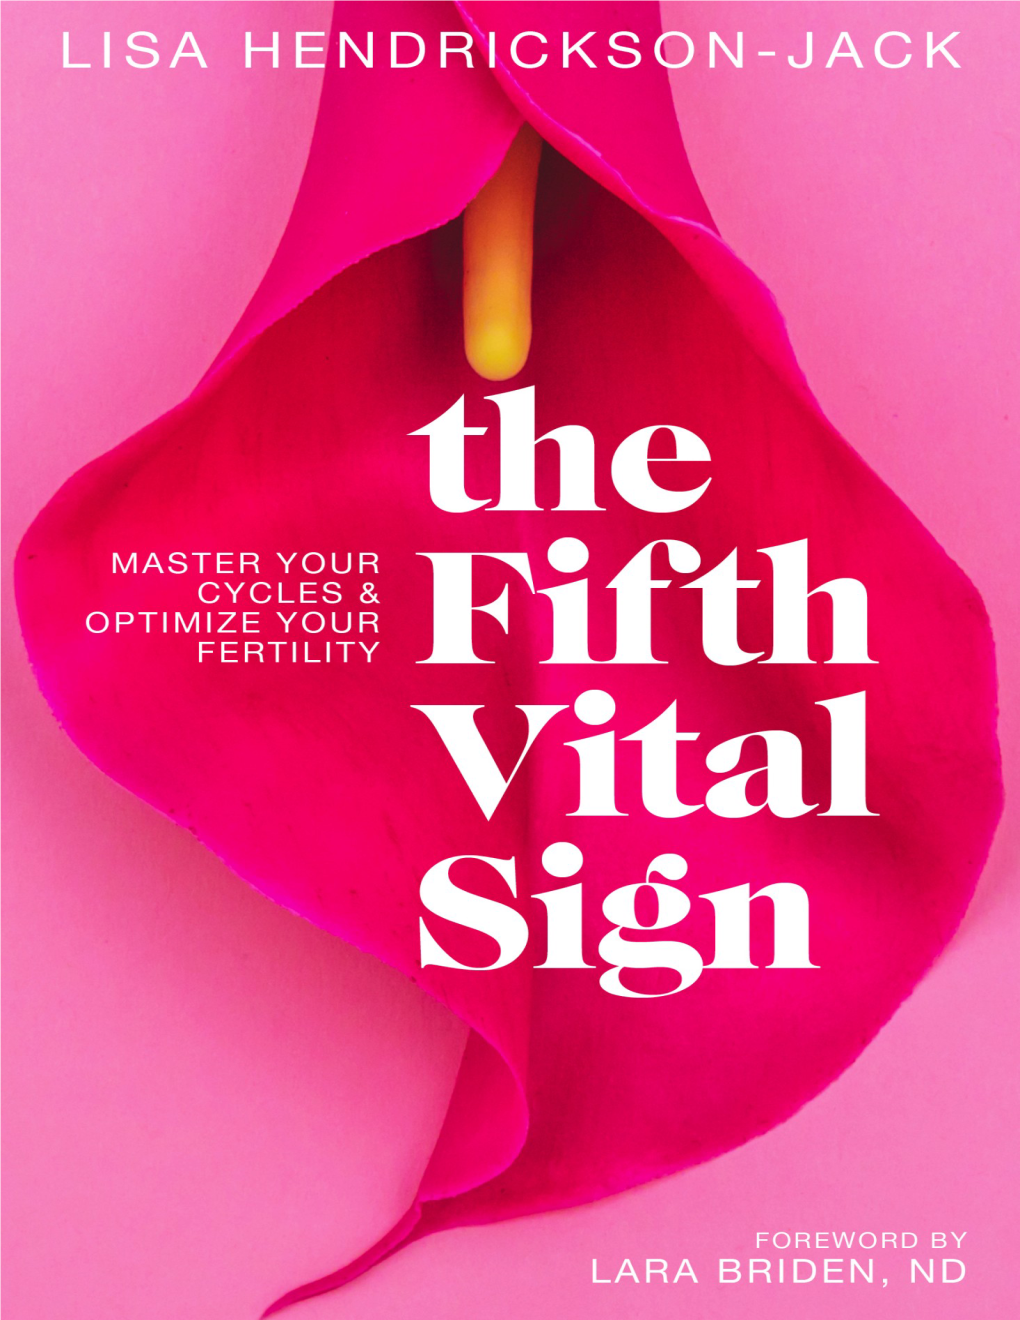 Your Menstrual Cycle Is the Fifth Vital Sign of Your Health and Your Fertility